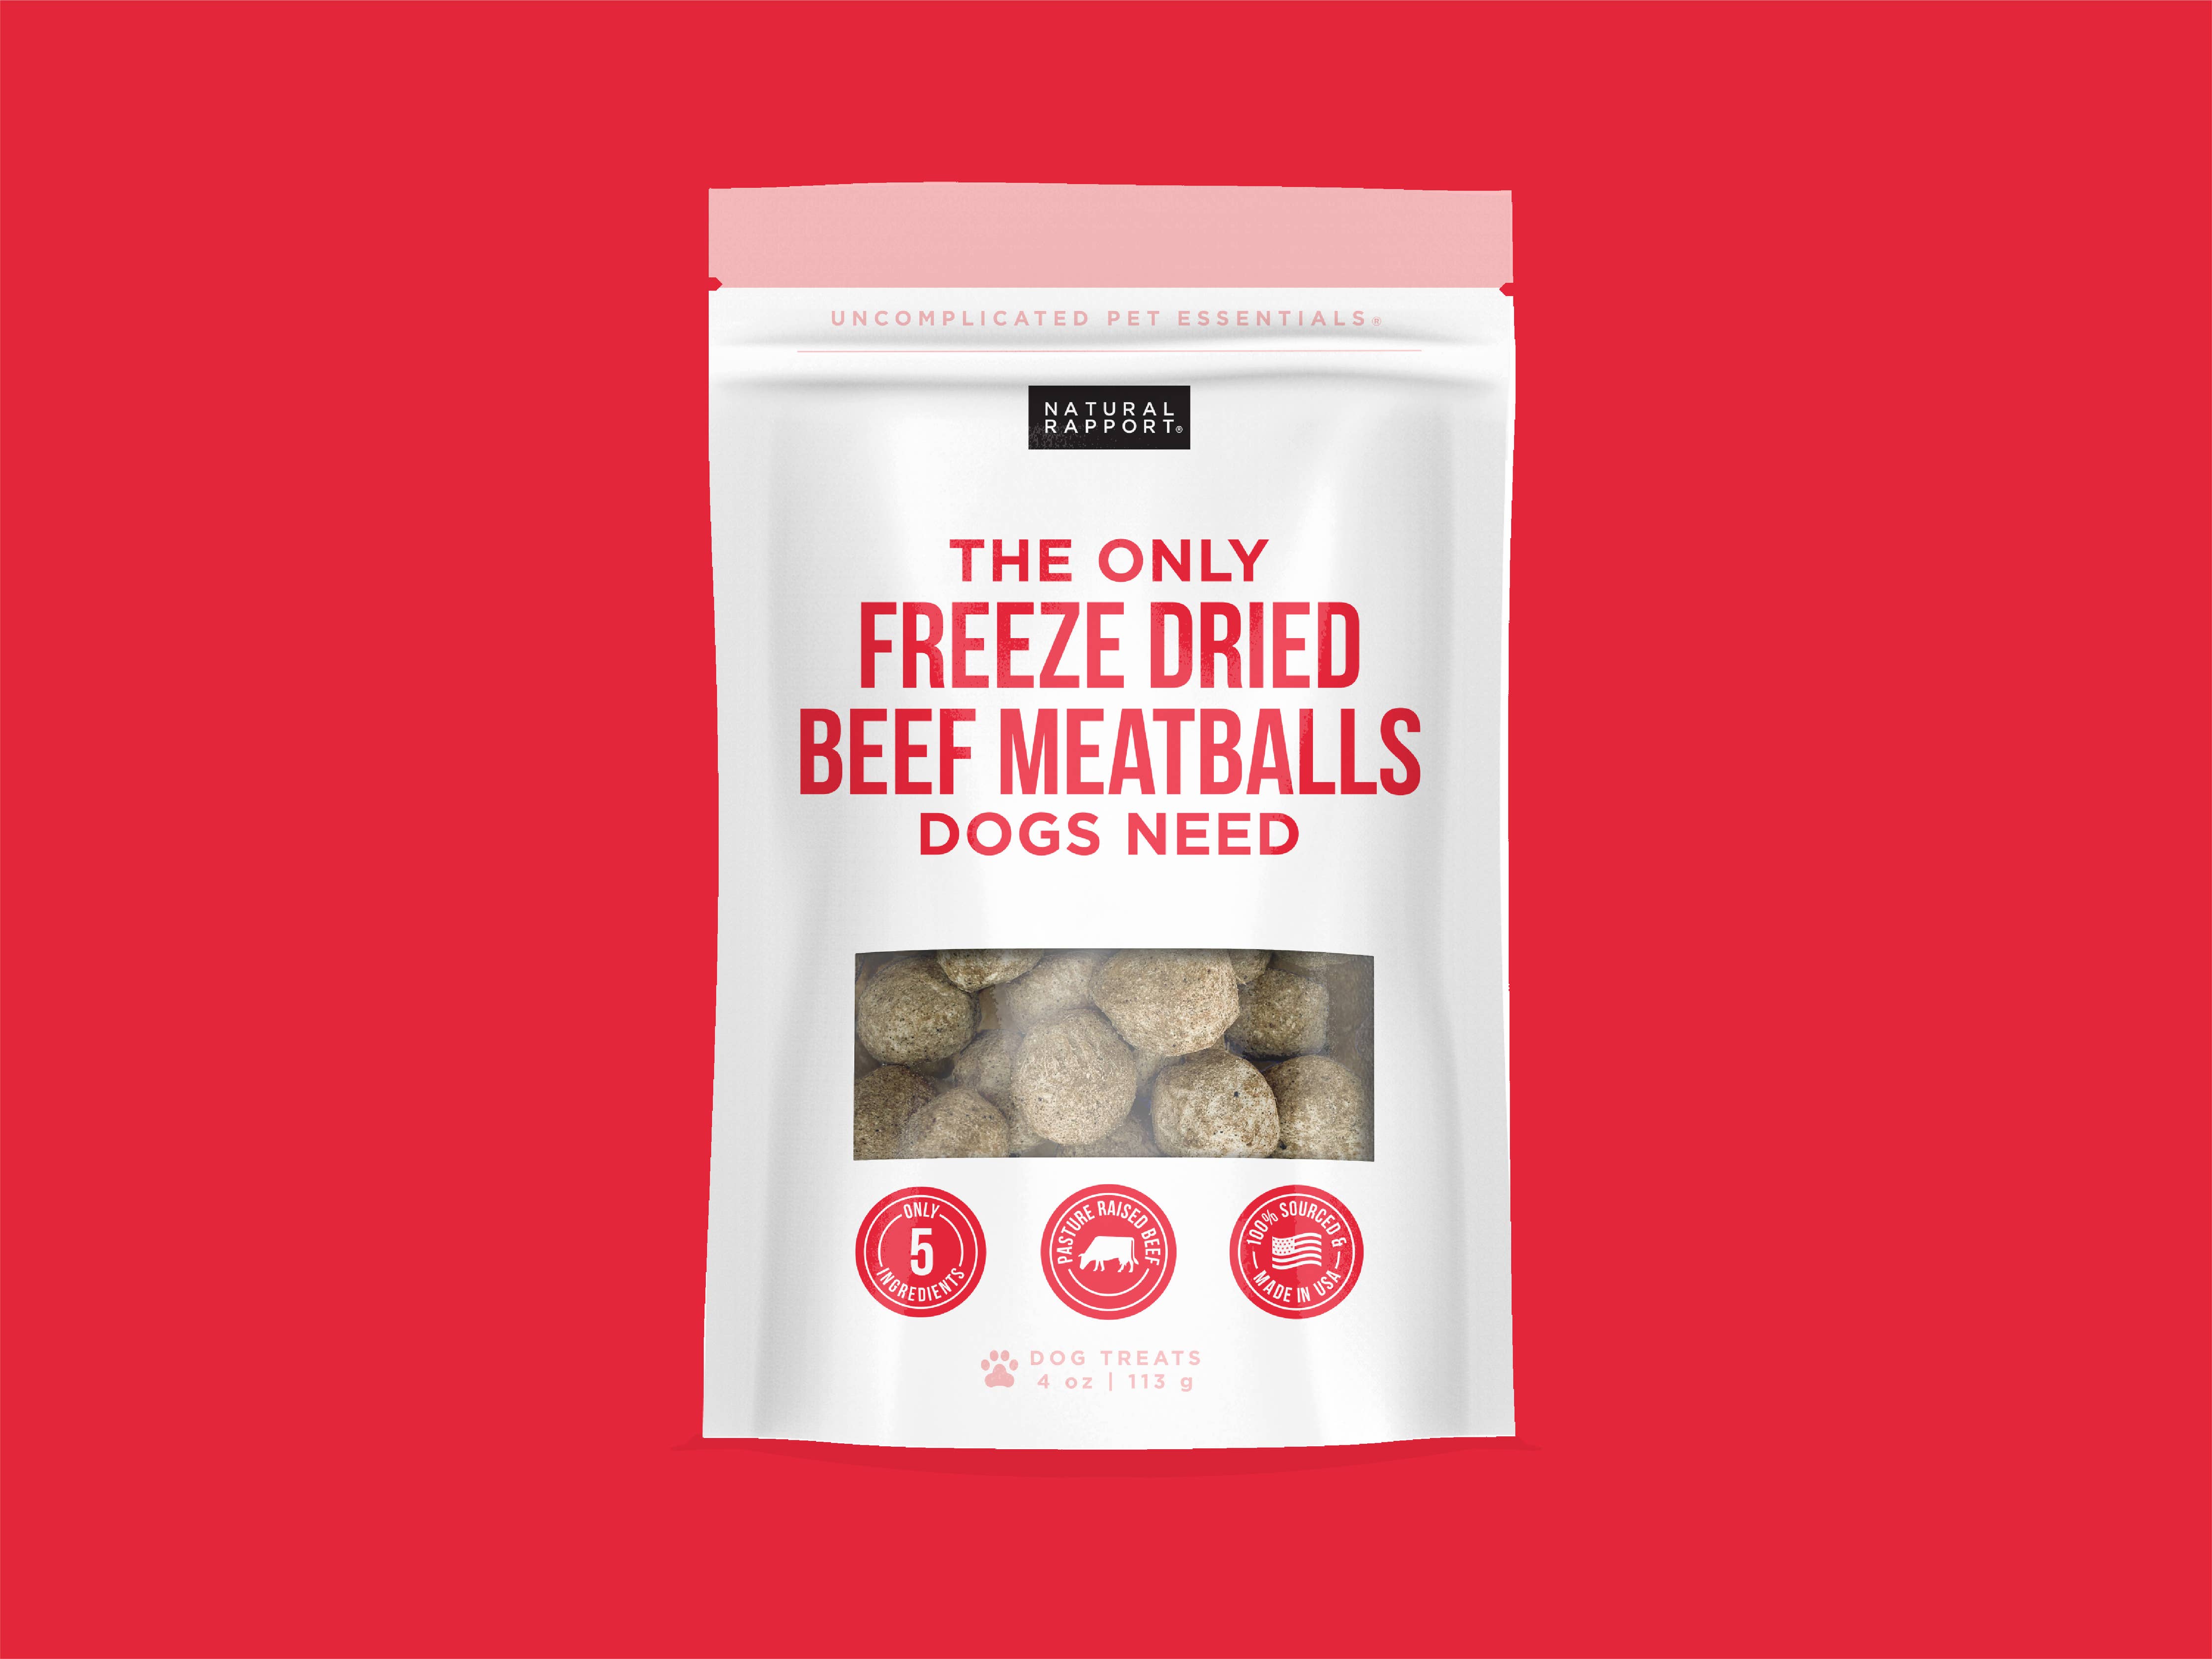 Natural Rapport - The Only Freeze Dried Beef Meatballs Dogs Need